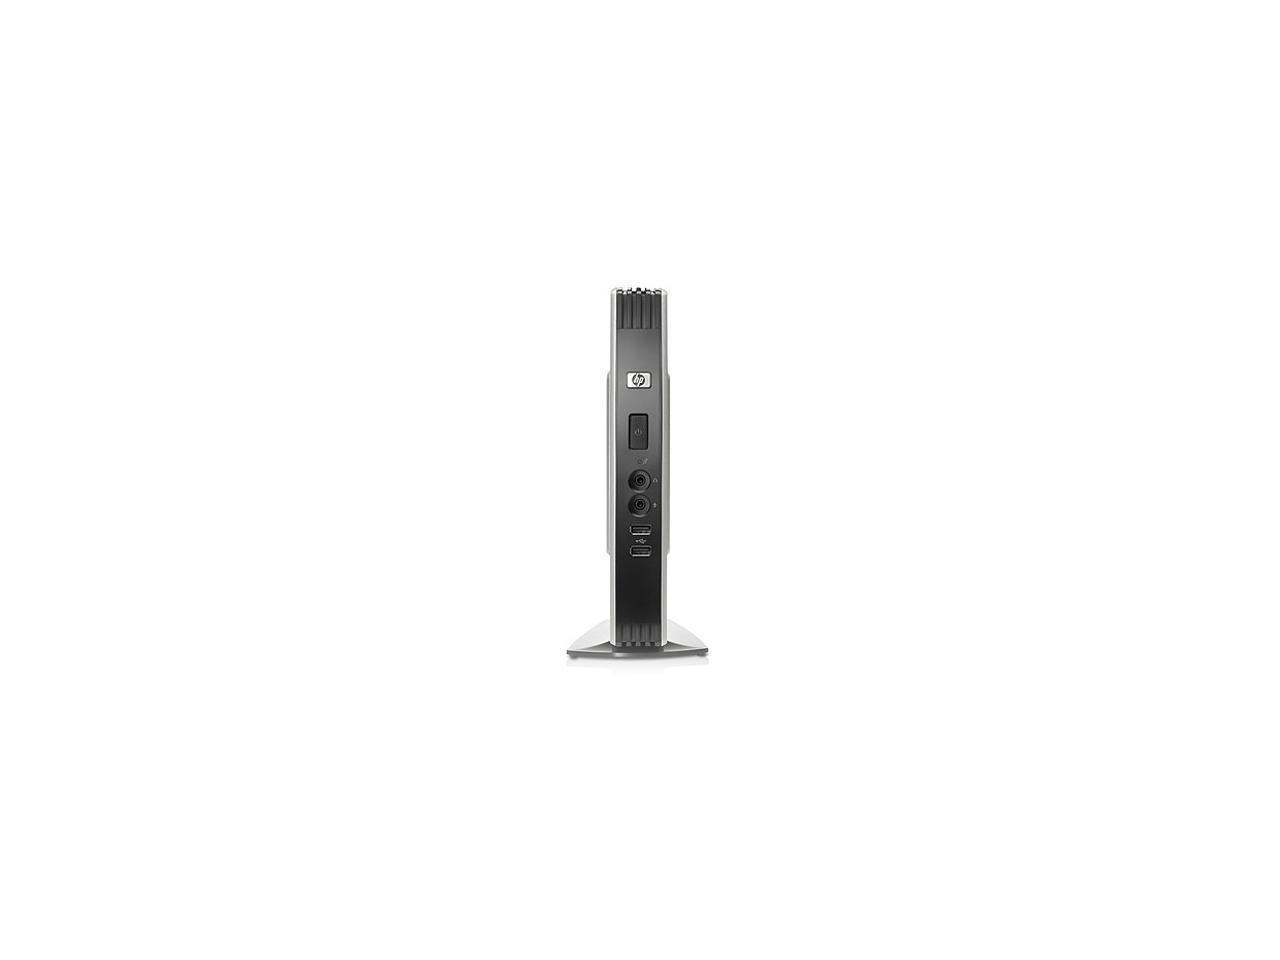 PSU Stand 4gbf / 2gbr / Wes 7 re-furbished HP t5740e thin client 